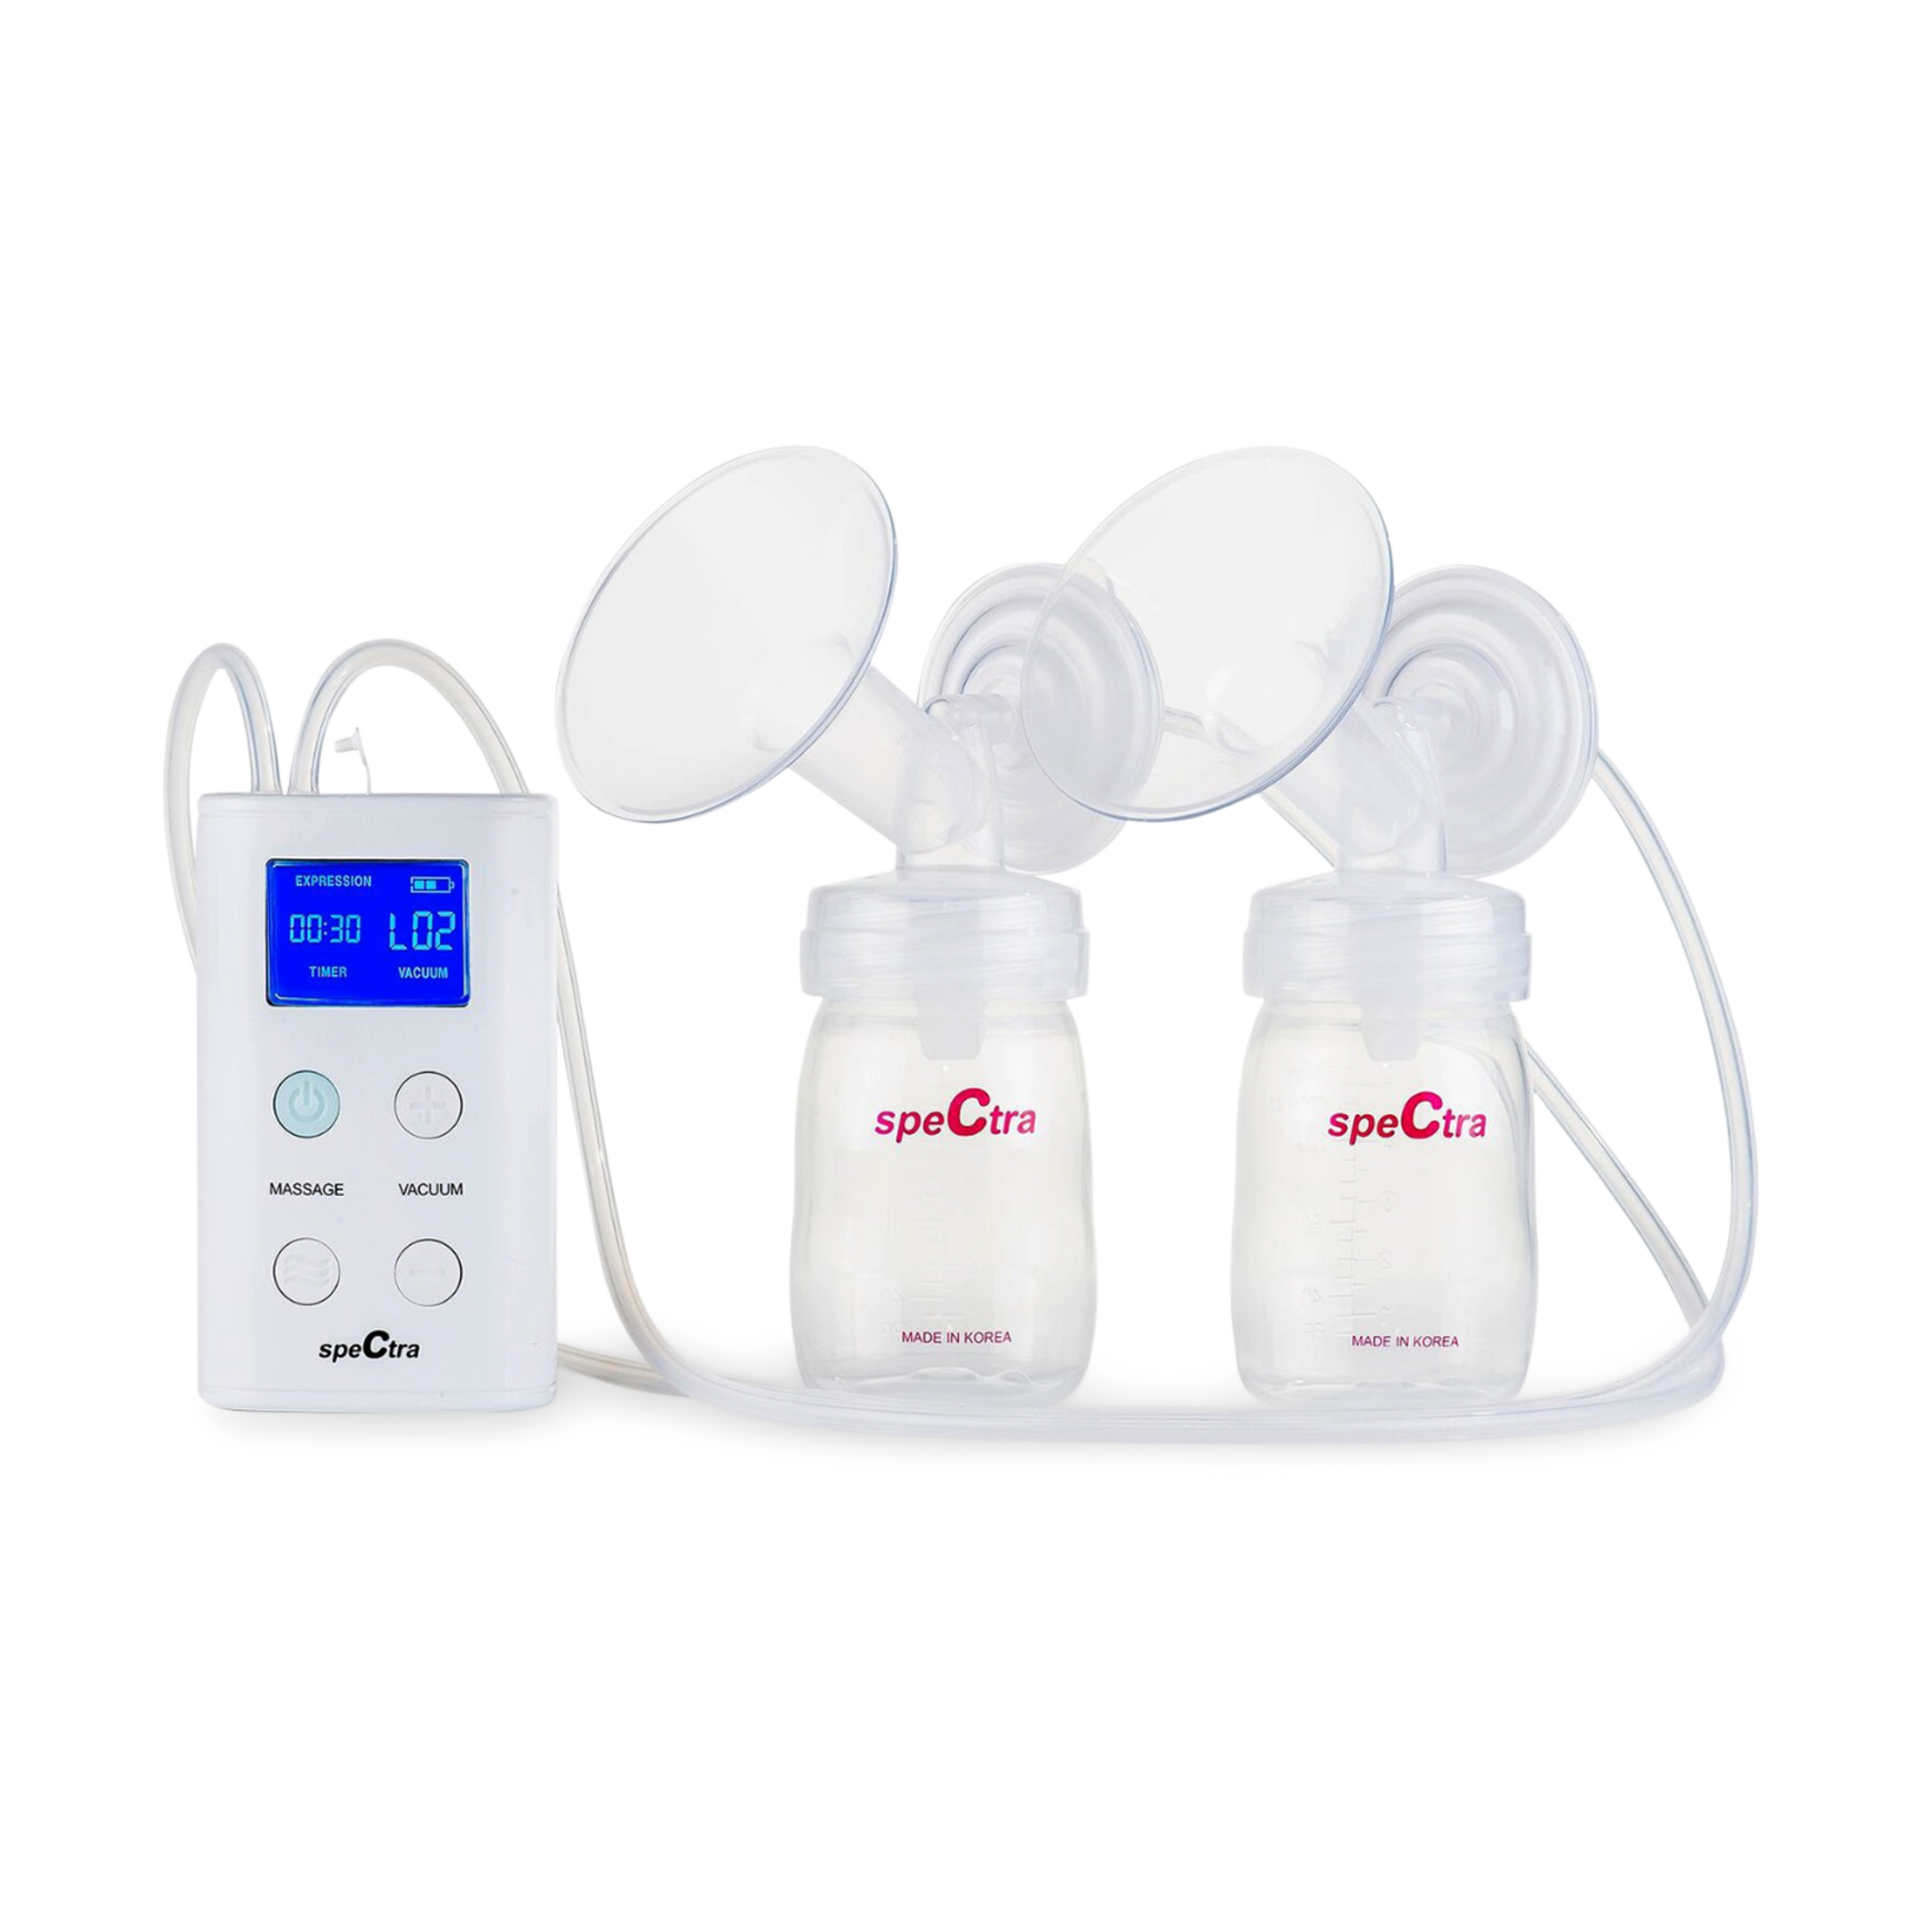 breast pump offers